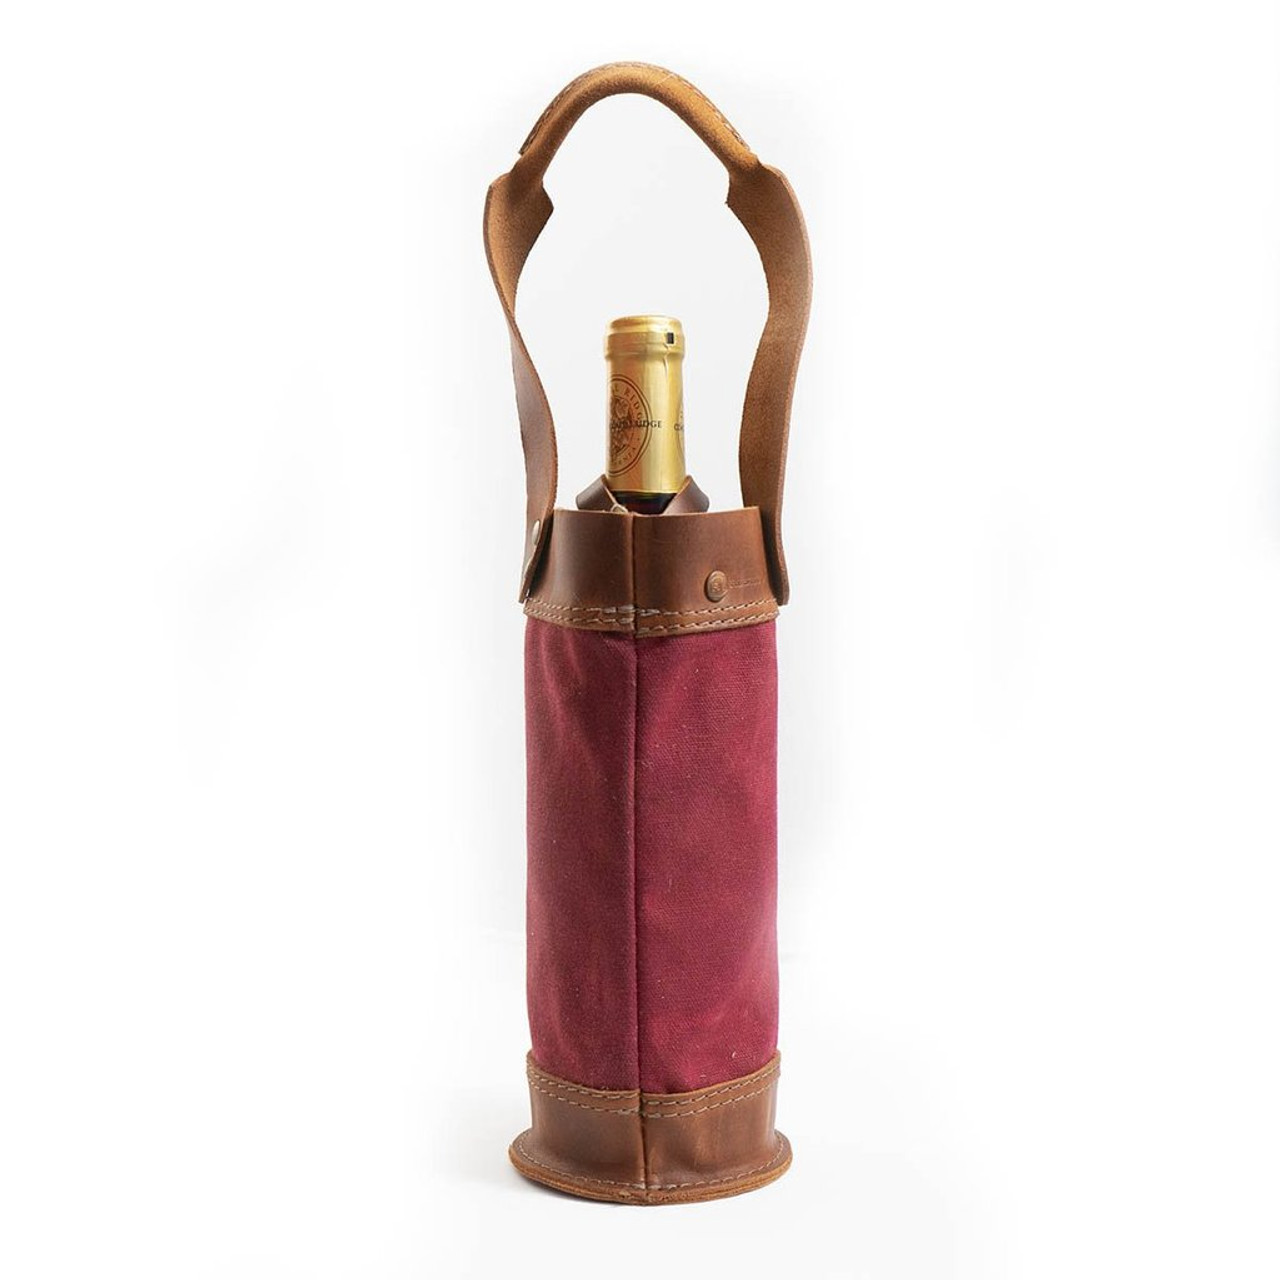 A Toast Wine Bottle Gift Bag - The Walters Art Museum